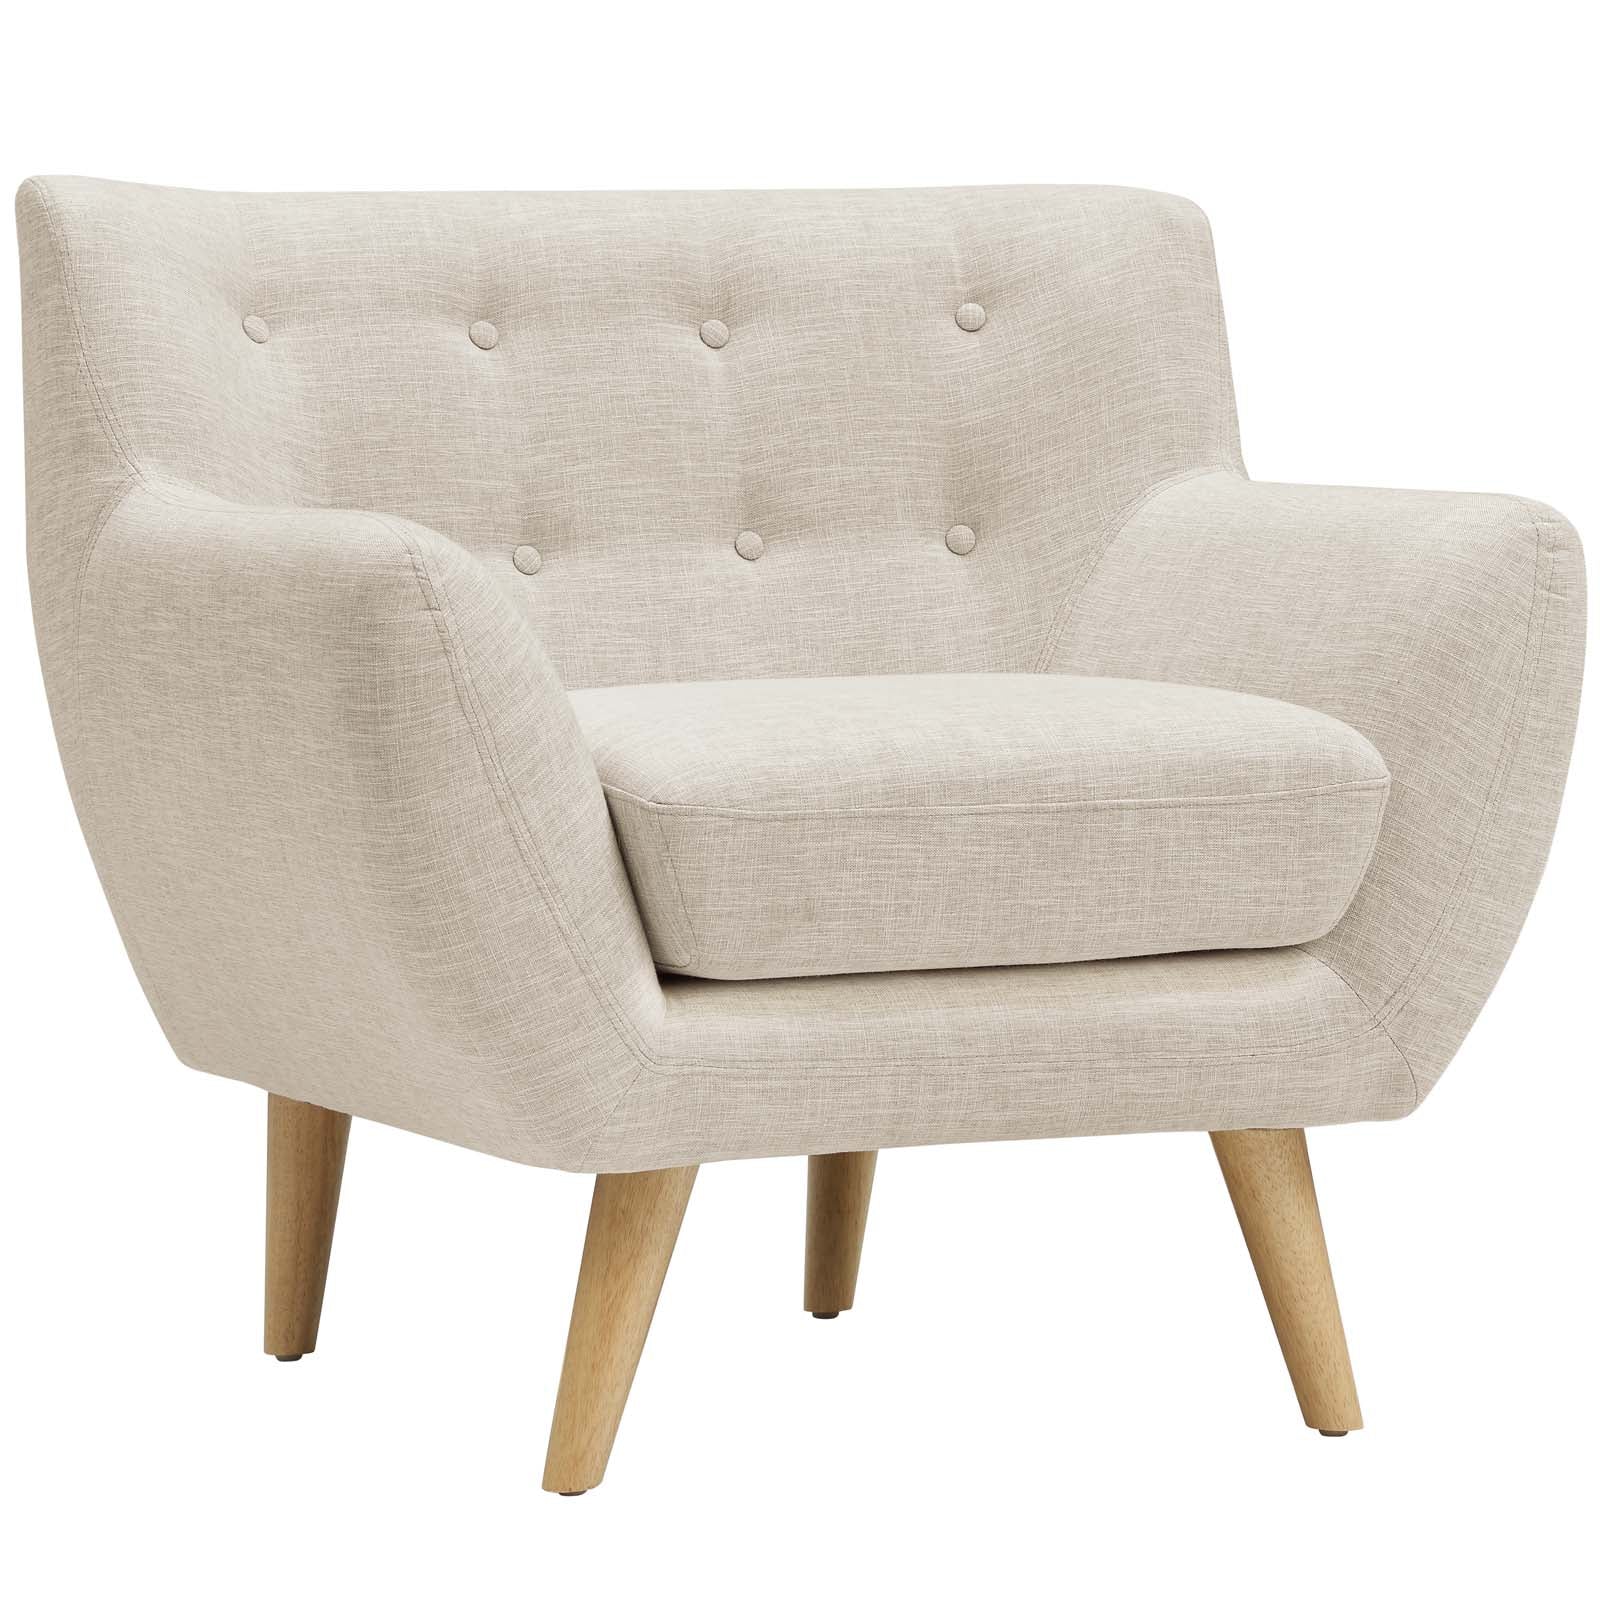 Modway Accent Chairs - Remark Upholstered Fabric Armchair Beige